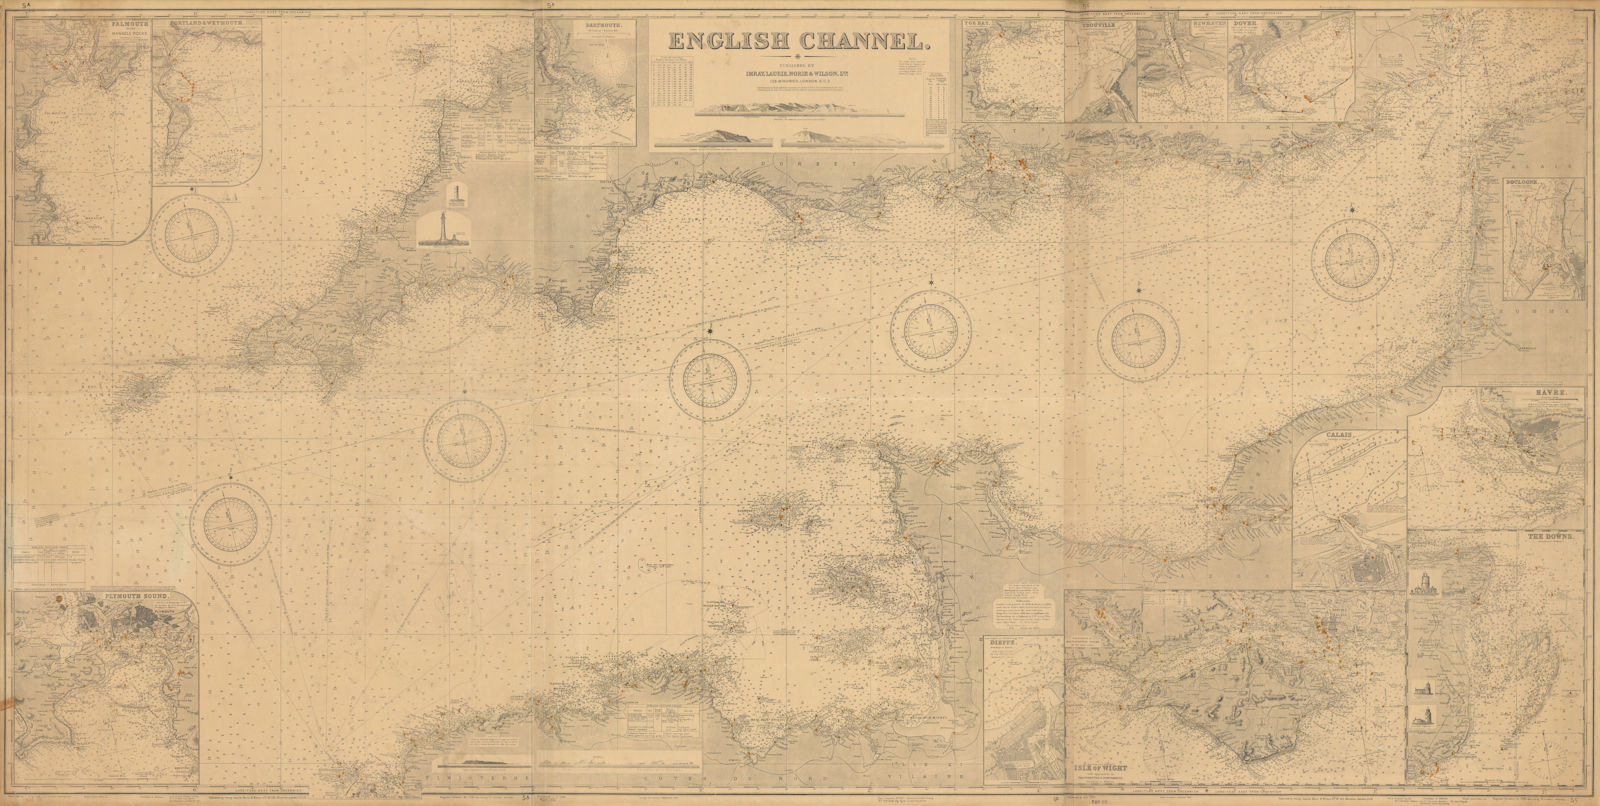 English Channel 105x210cm. Imray Laurie Norie & Wilson sea chart 1939 (1939) map